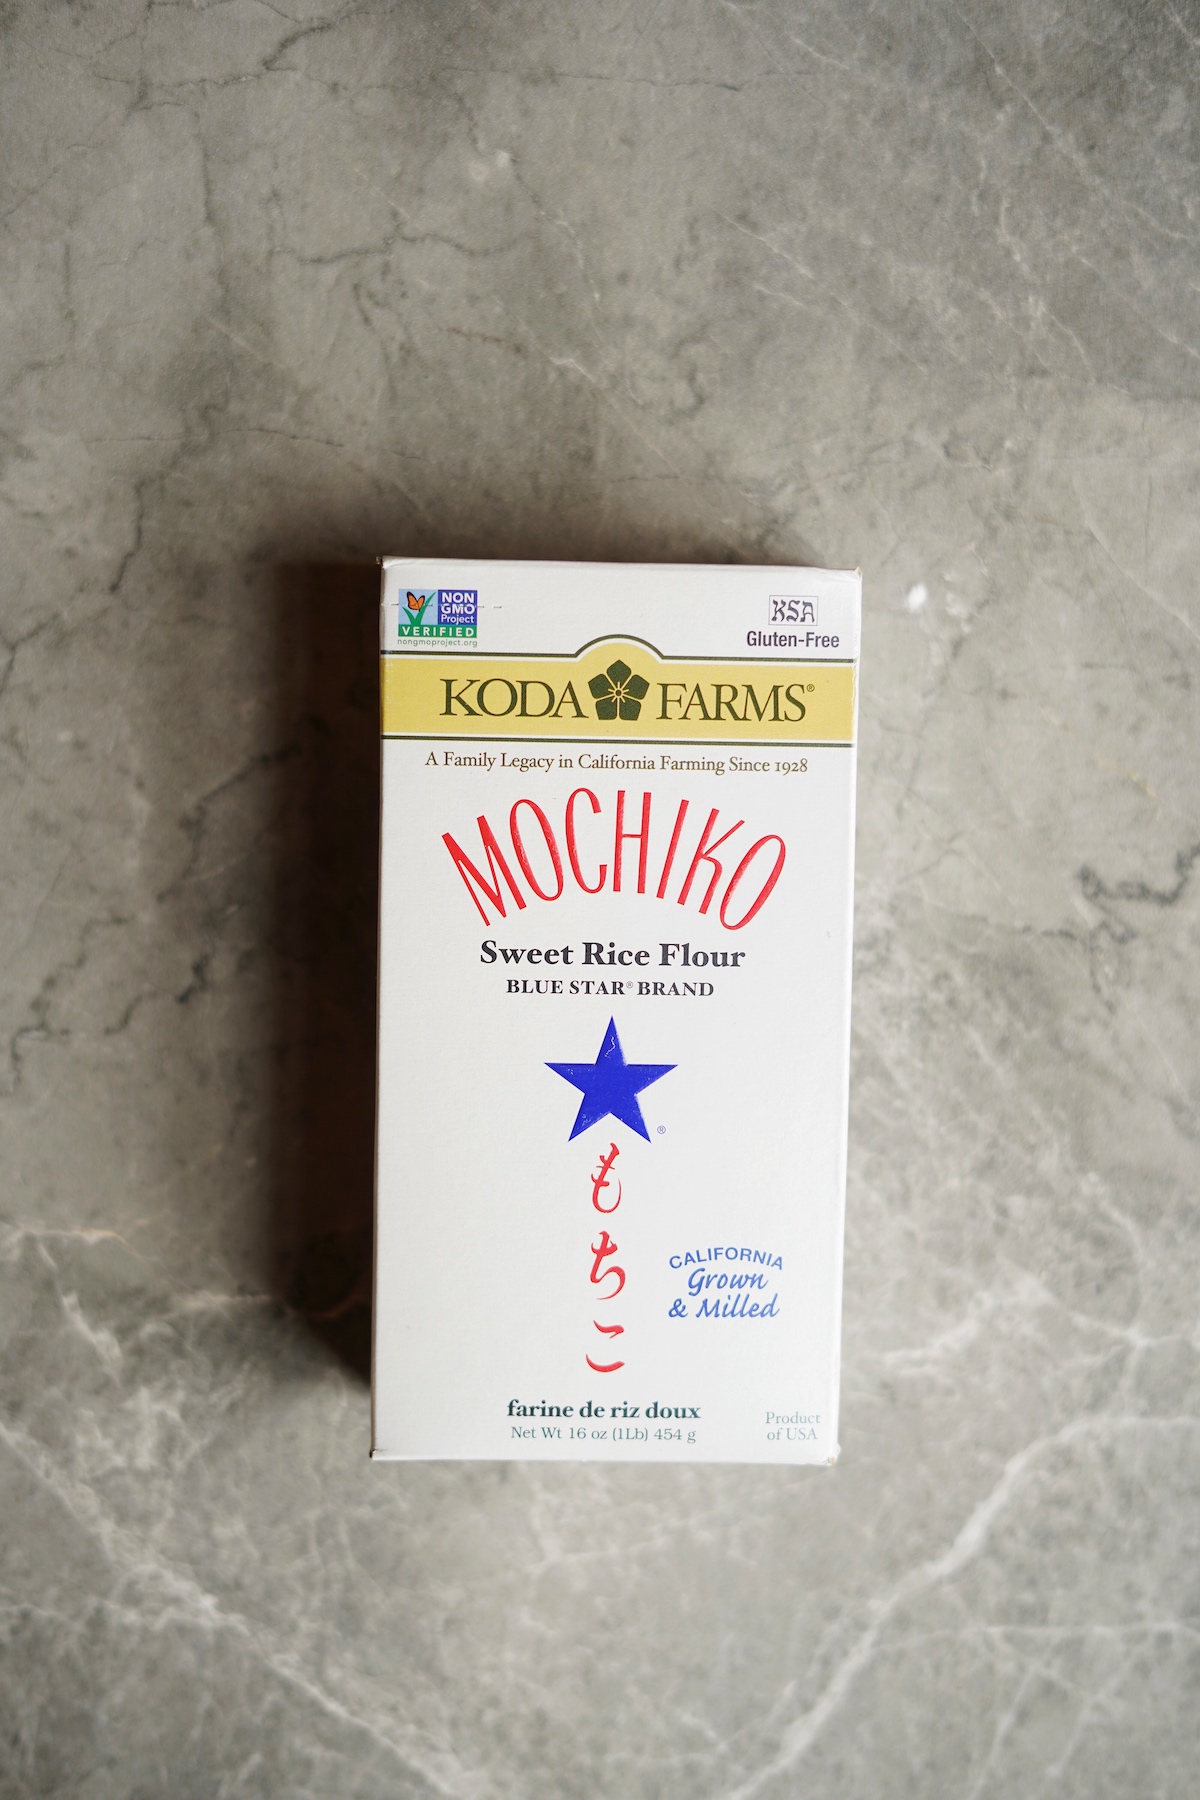 Mochiko flour needed to make these chewy mochi brownies.